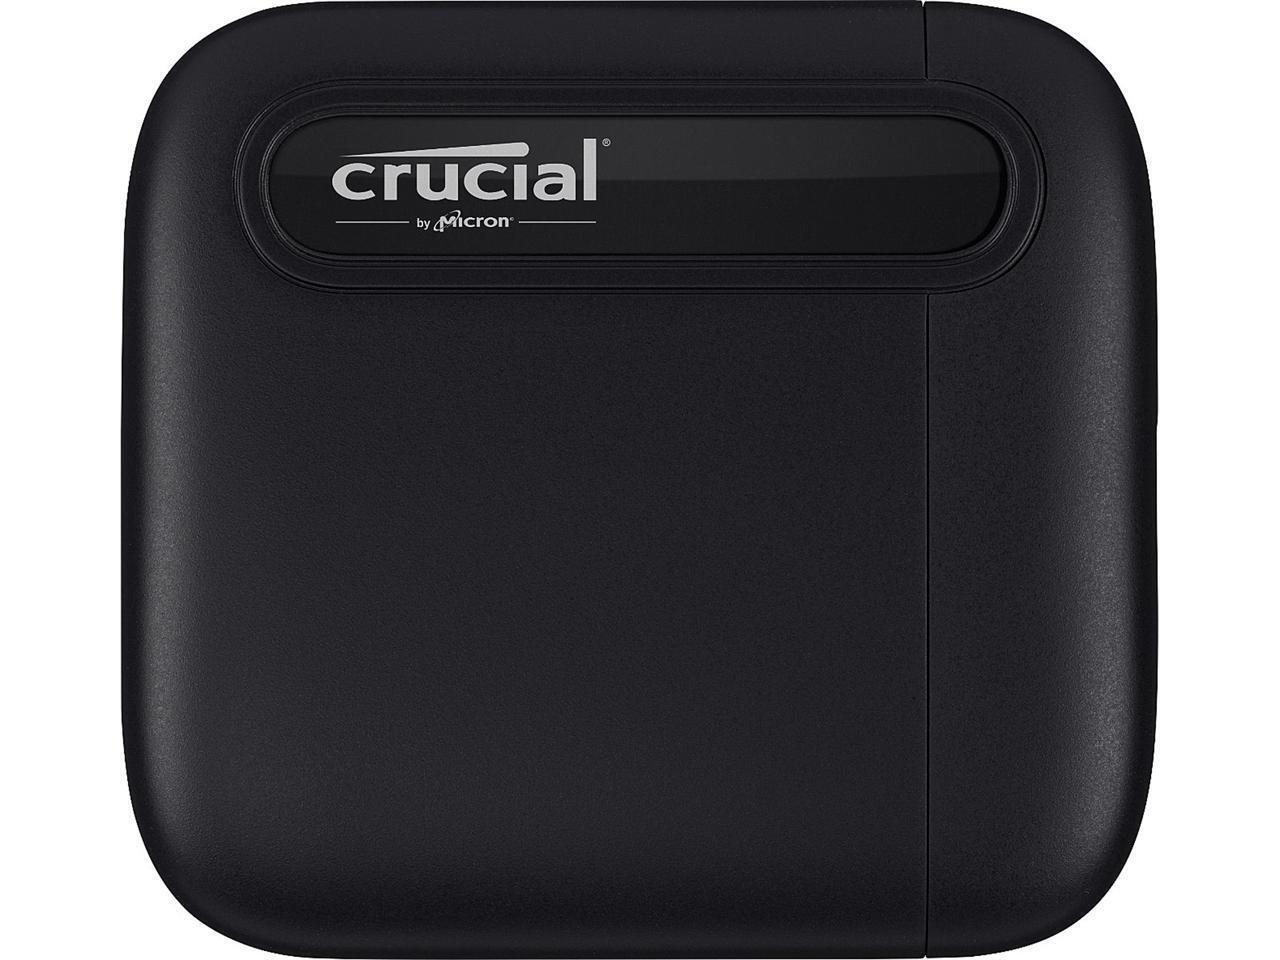 Crucial X6 2TB Portable SSD - Up to 800 MB/s - USB 3.2 - External Solid State